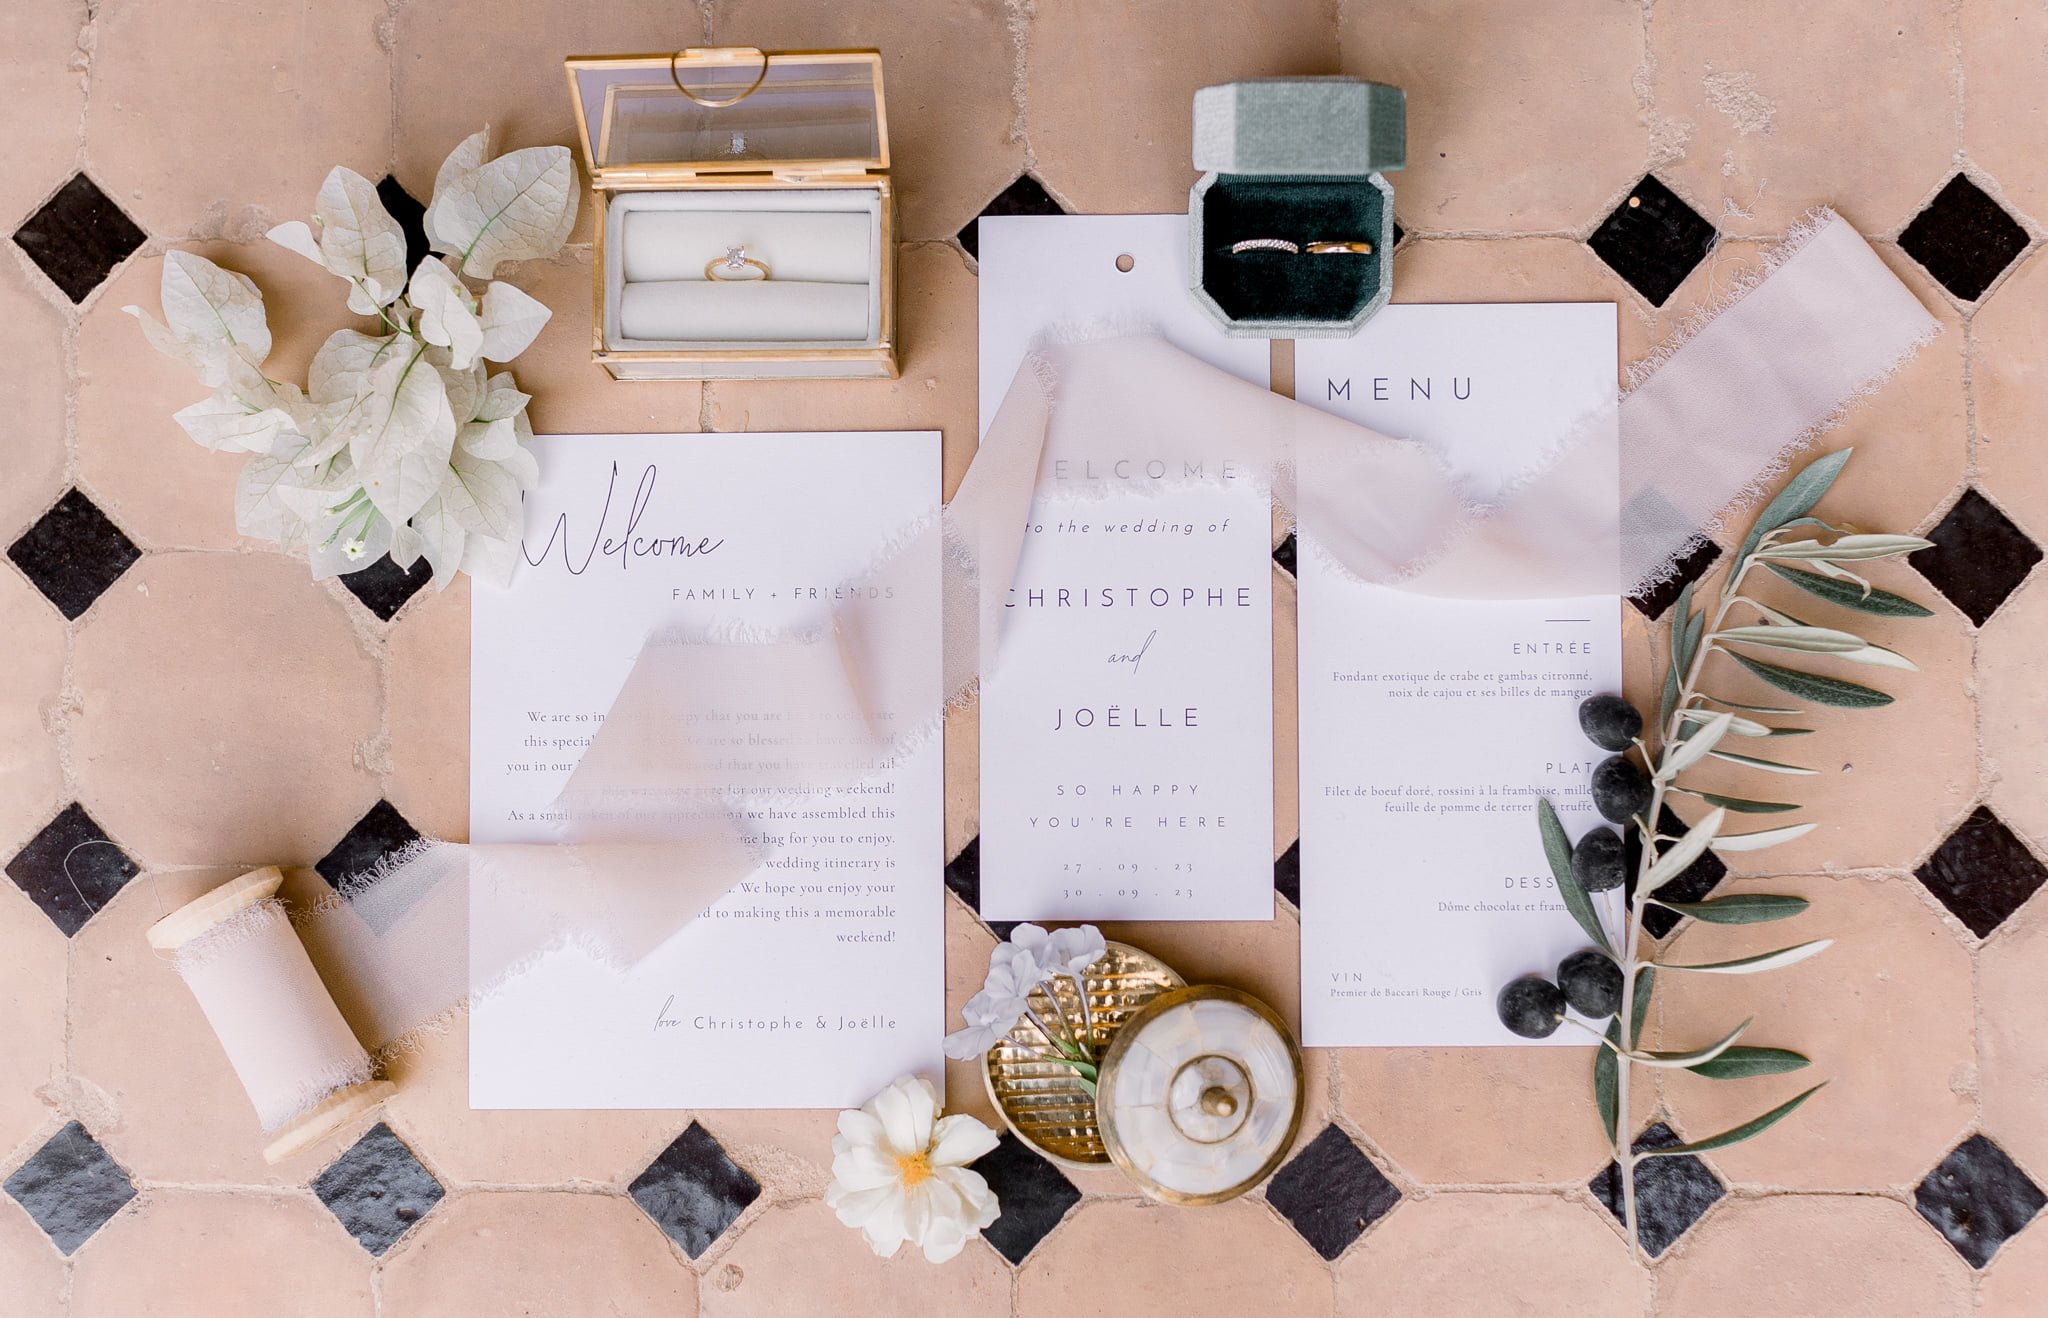 Wedding stationery and styling details at chic wedding in Marrakech